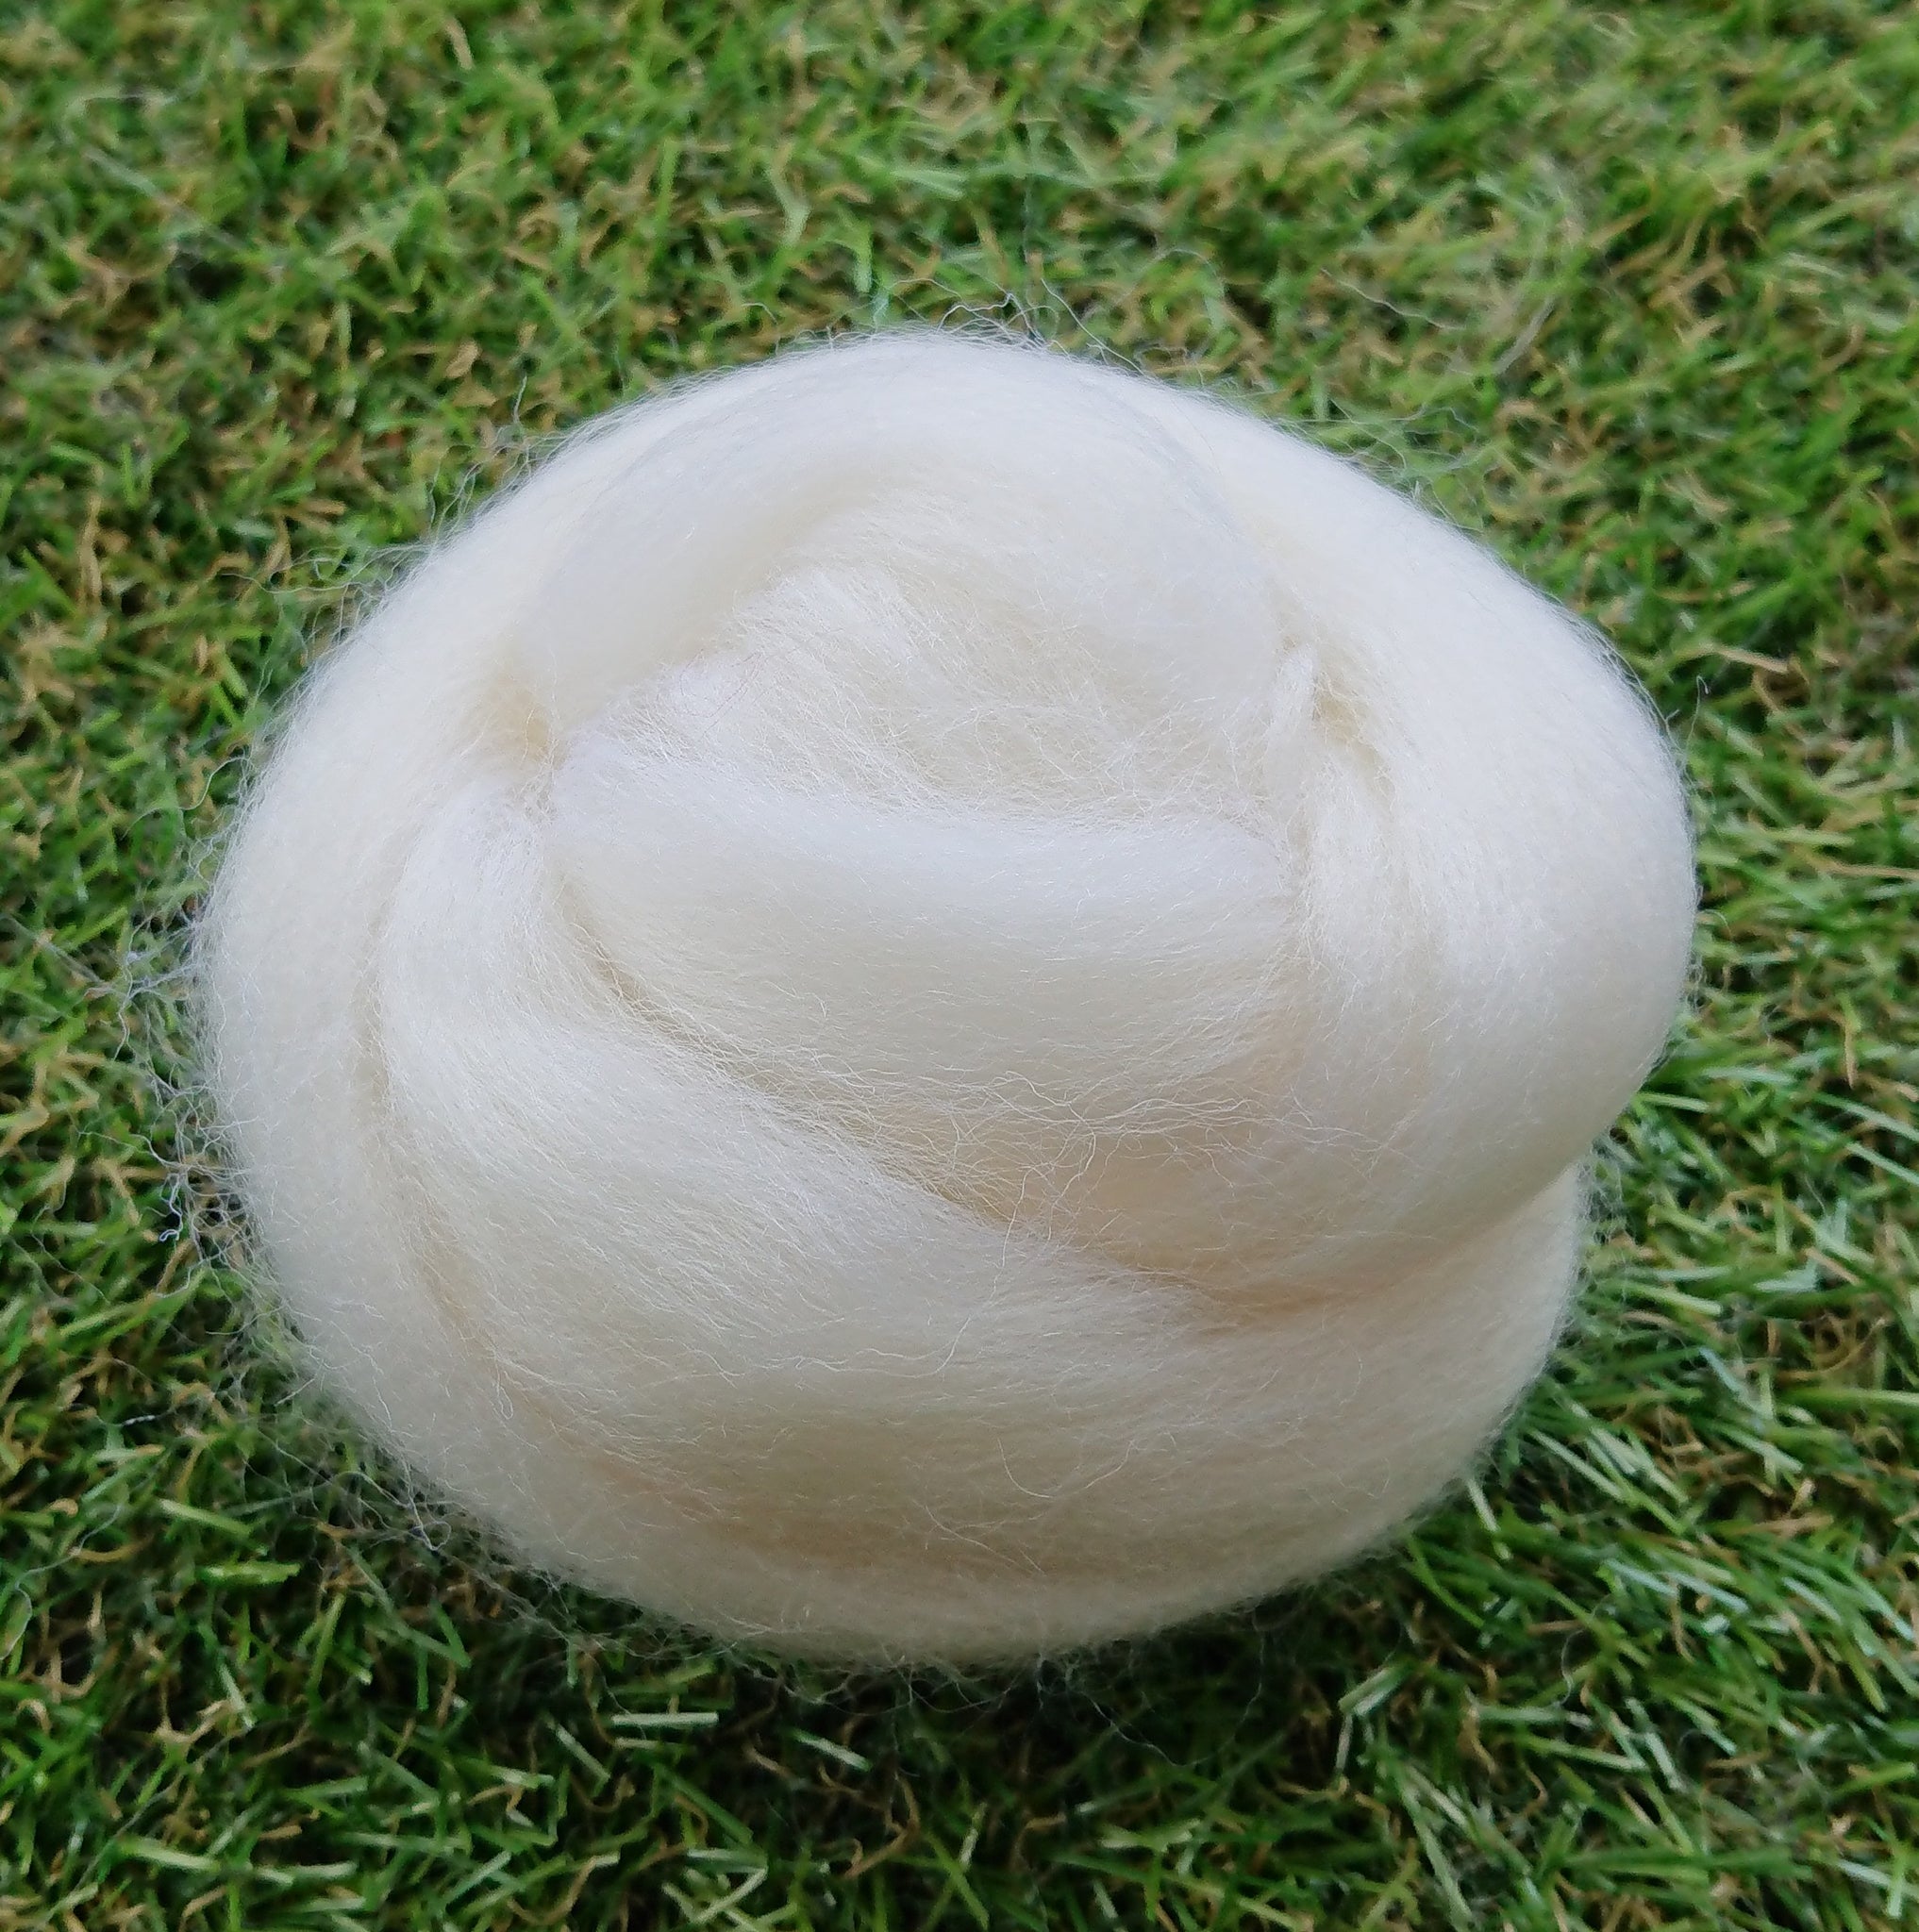 Corriedale Wool Roving - White - A Child's Dream